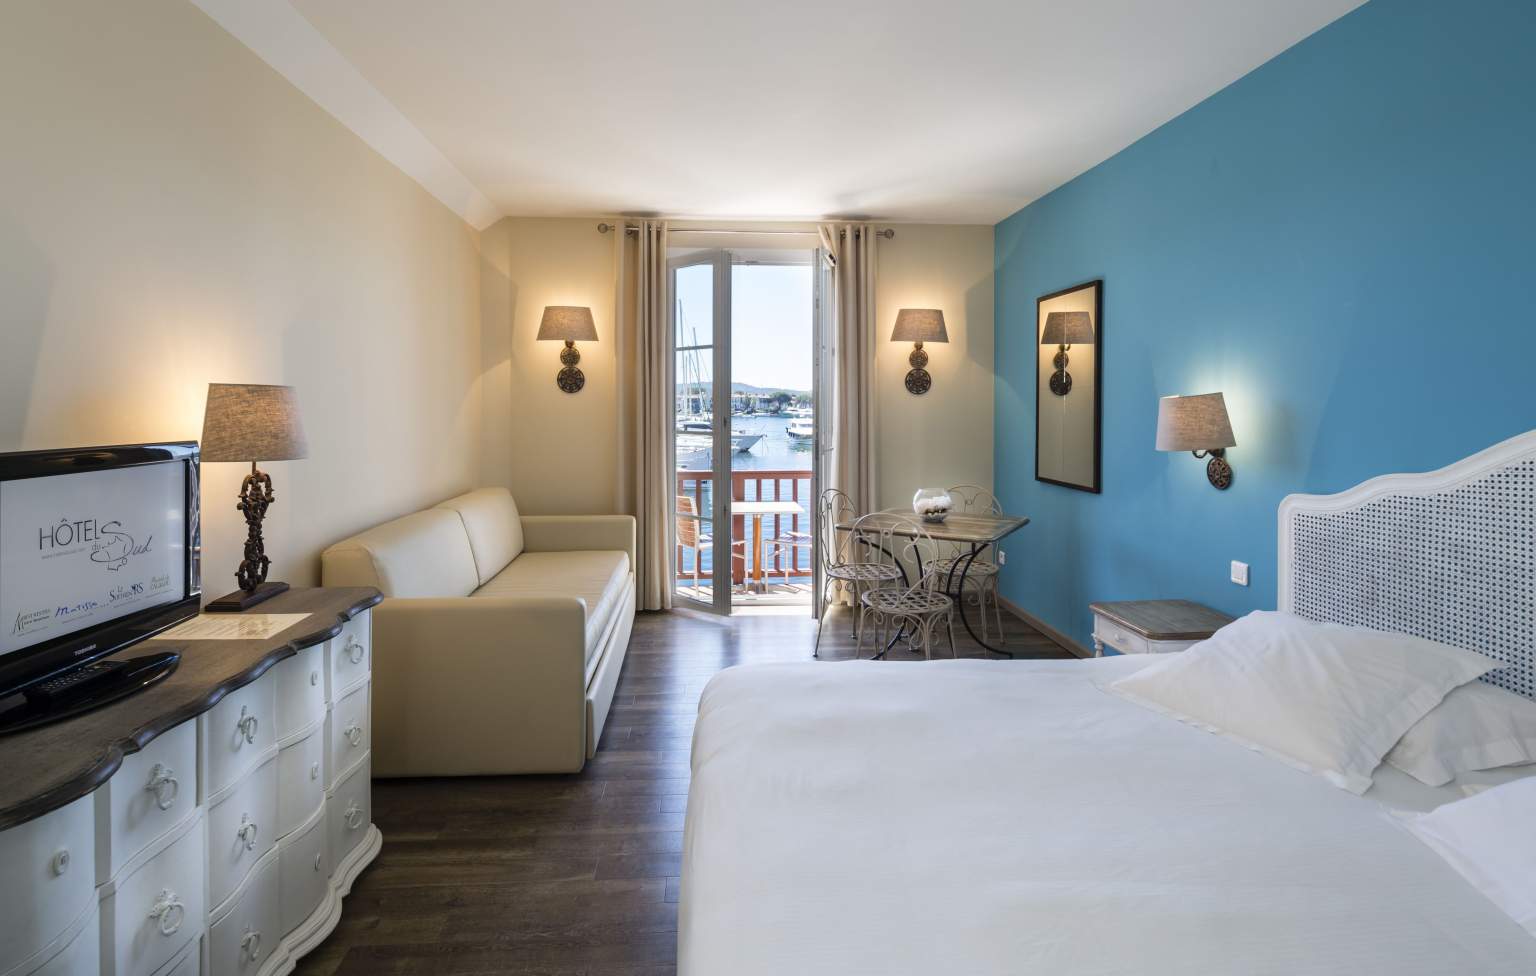 Rates of Suffren Hotel 4star in Port-Grimaud, close to the Beach Hotel in Var (83)